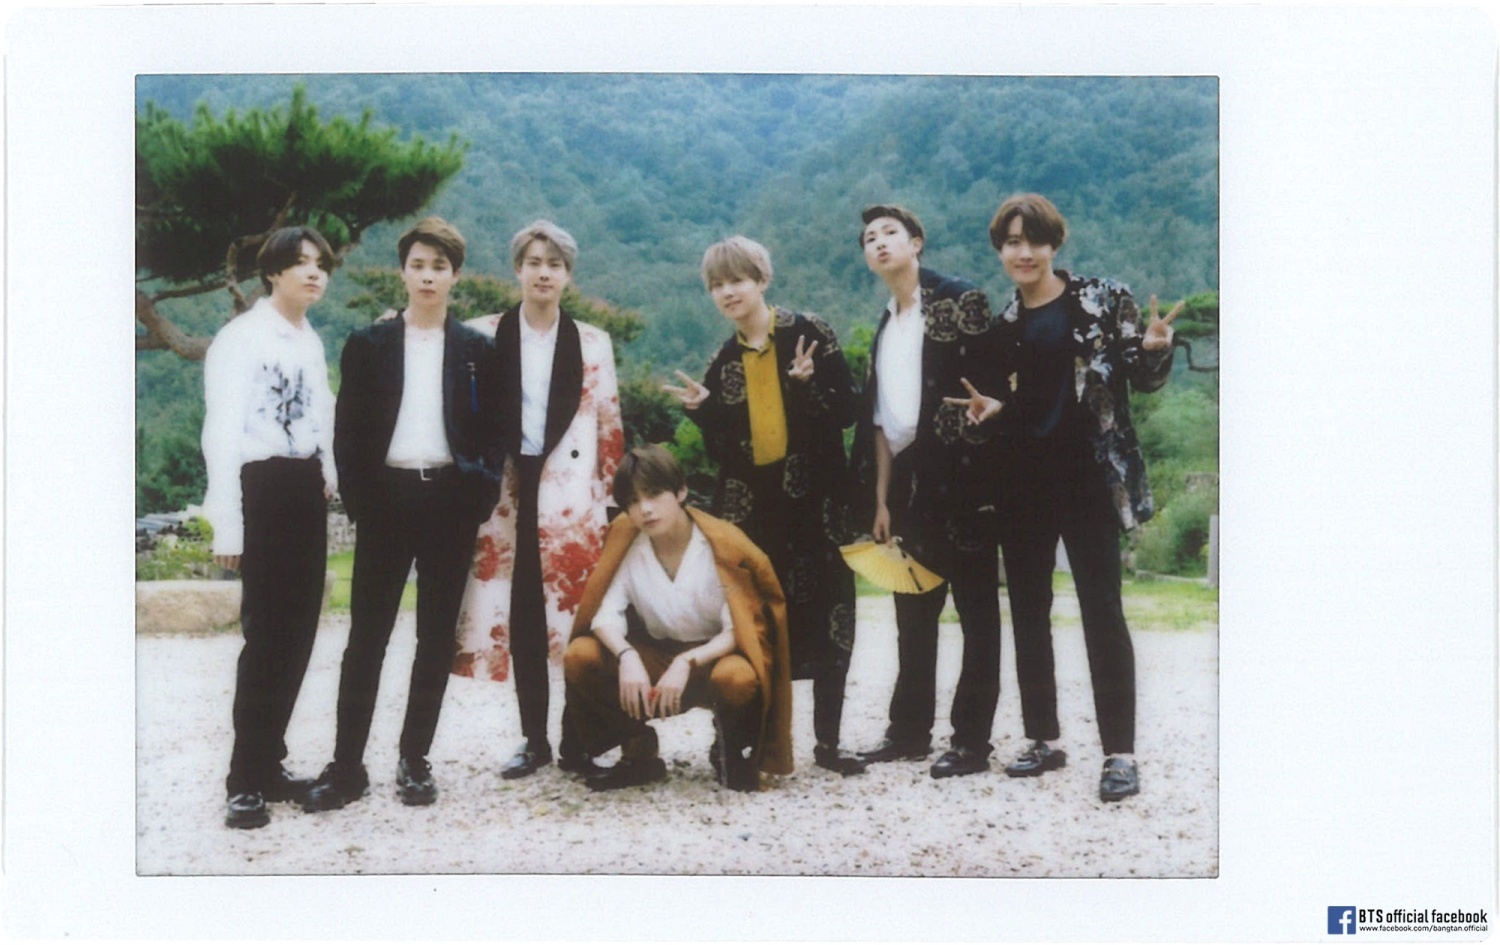 Year-end present of BTS… Published “Happy 2019” Content